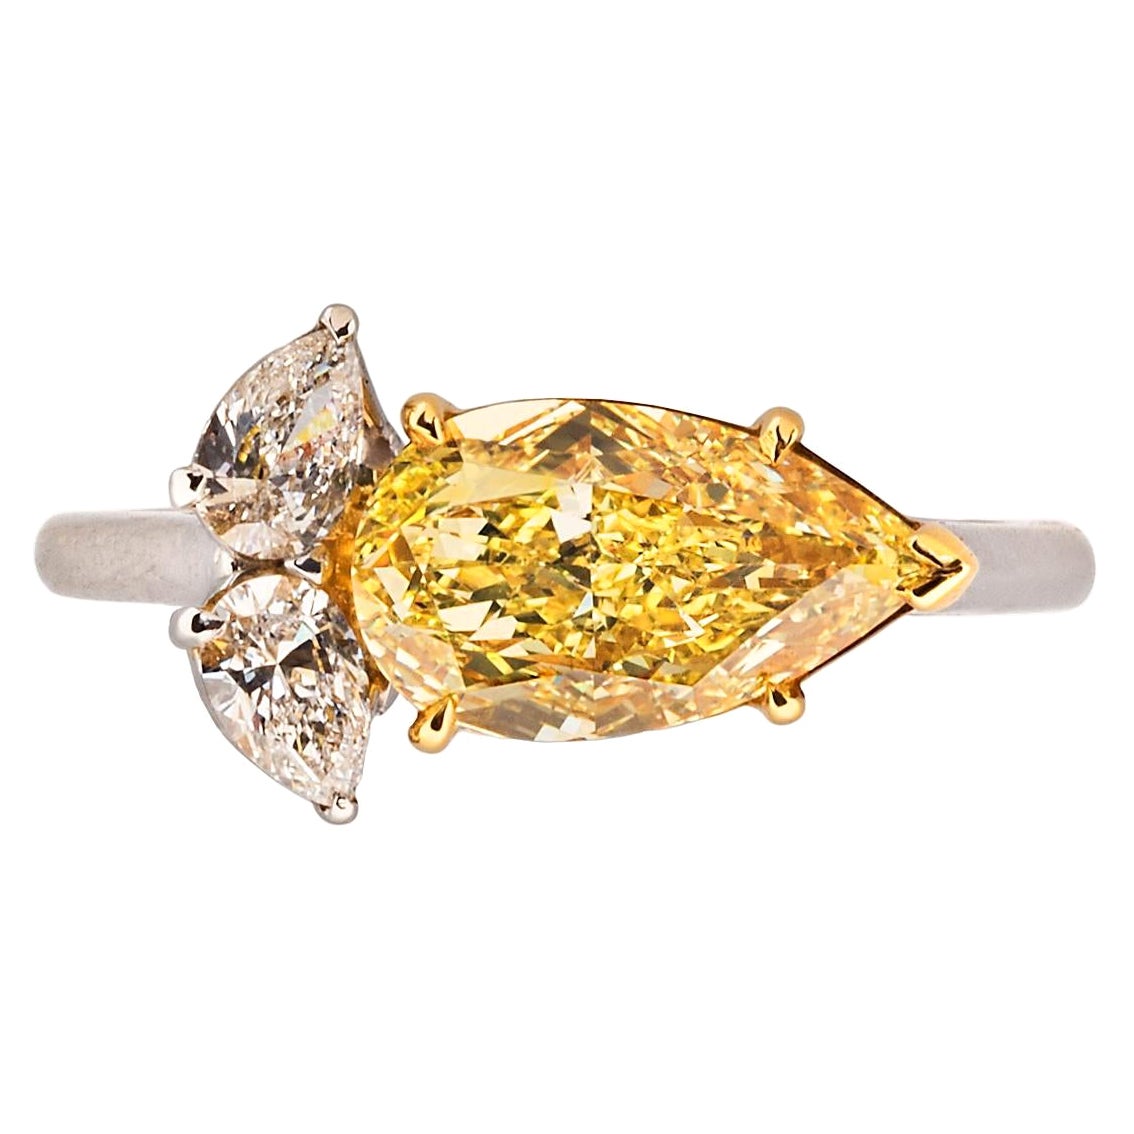 A 2.01 carat fancy intense yellow pear modified brilliant-cut diamond with two pear-shaped diamonds weighing approximately 0.25. – 0.35 carats, mounted in platinum and 18k yellow gold.  

Size 6-1/2, can be resized 
Accompanied by 2020 GIA report